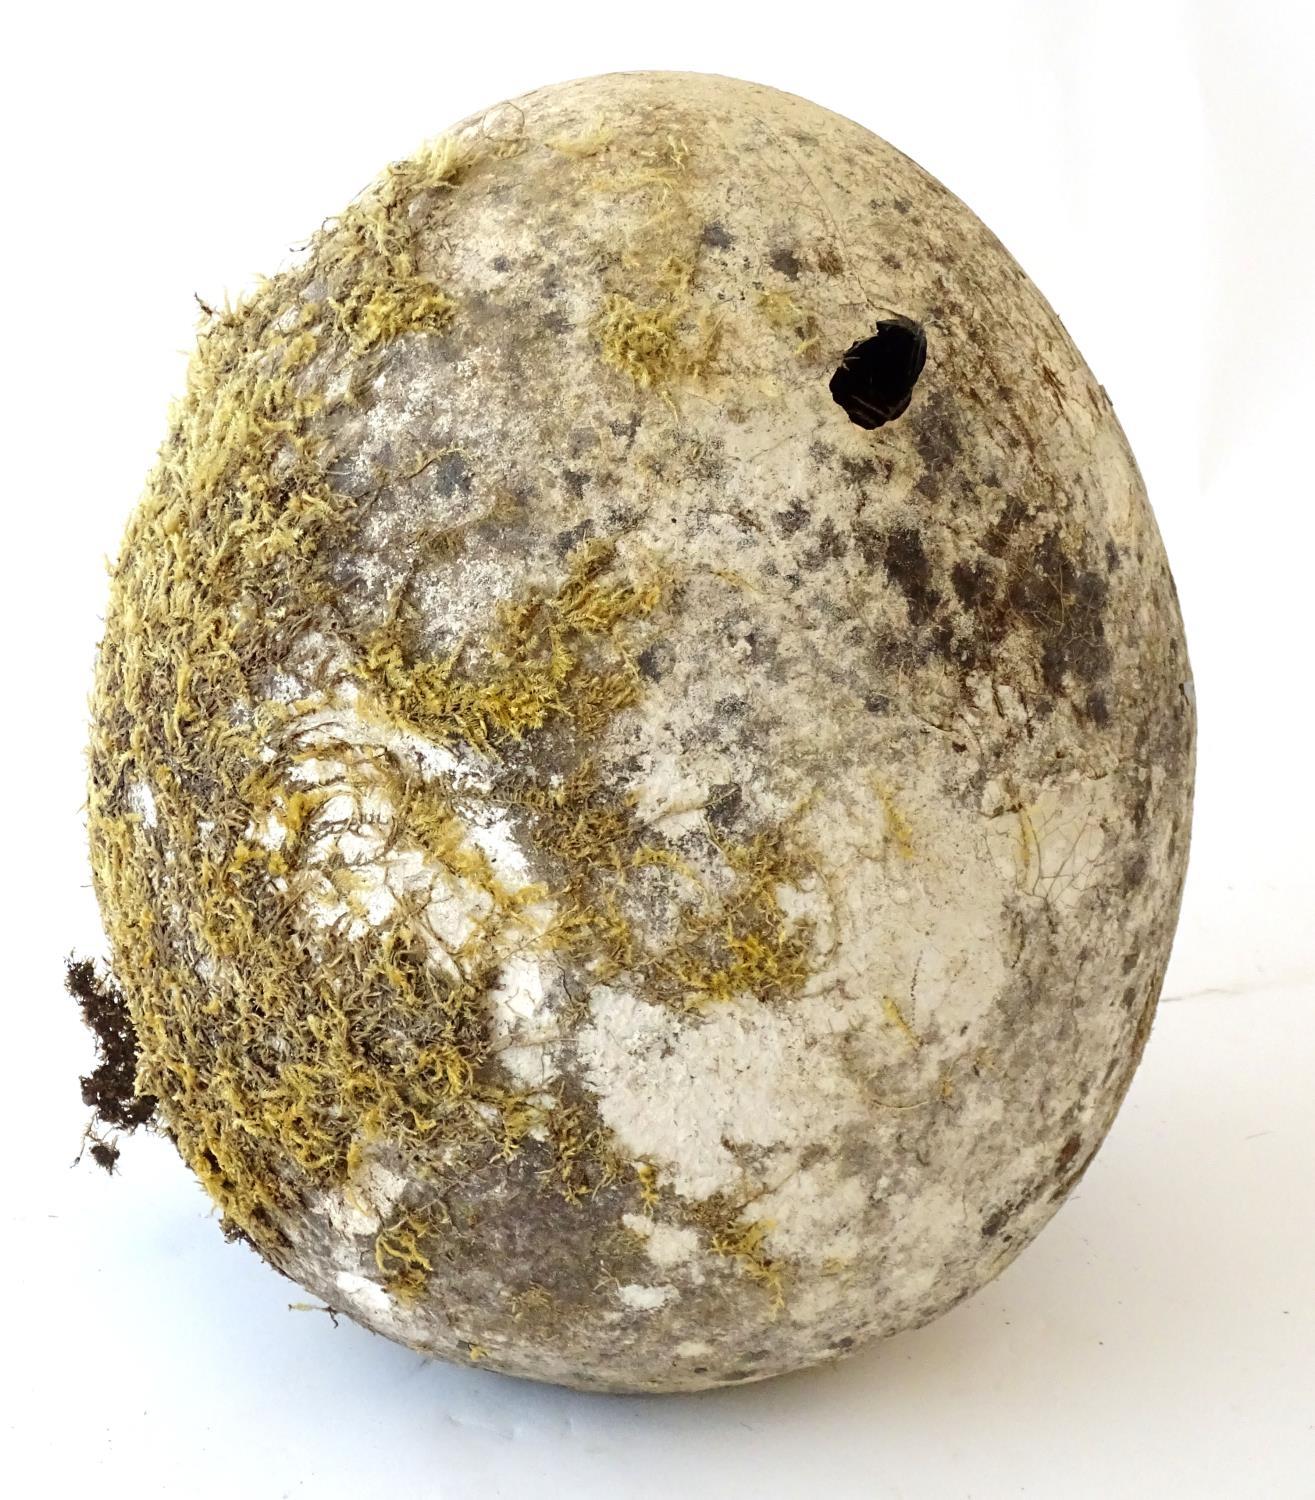 A novelty, oversize ornithological display/film prop model egg, ceramic, 14 1/2" tall Notice to - Image 5 of 5